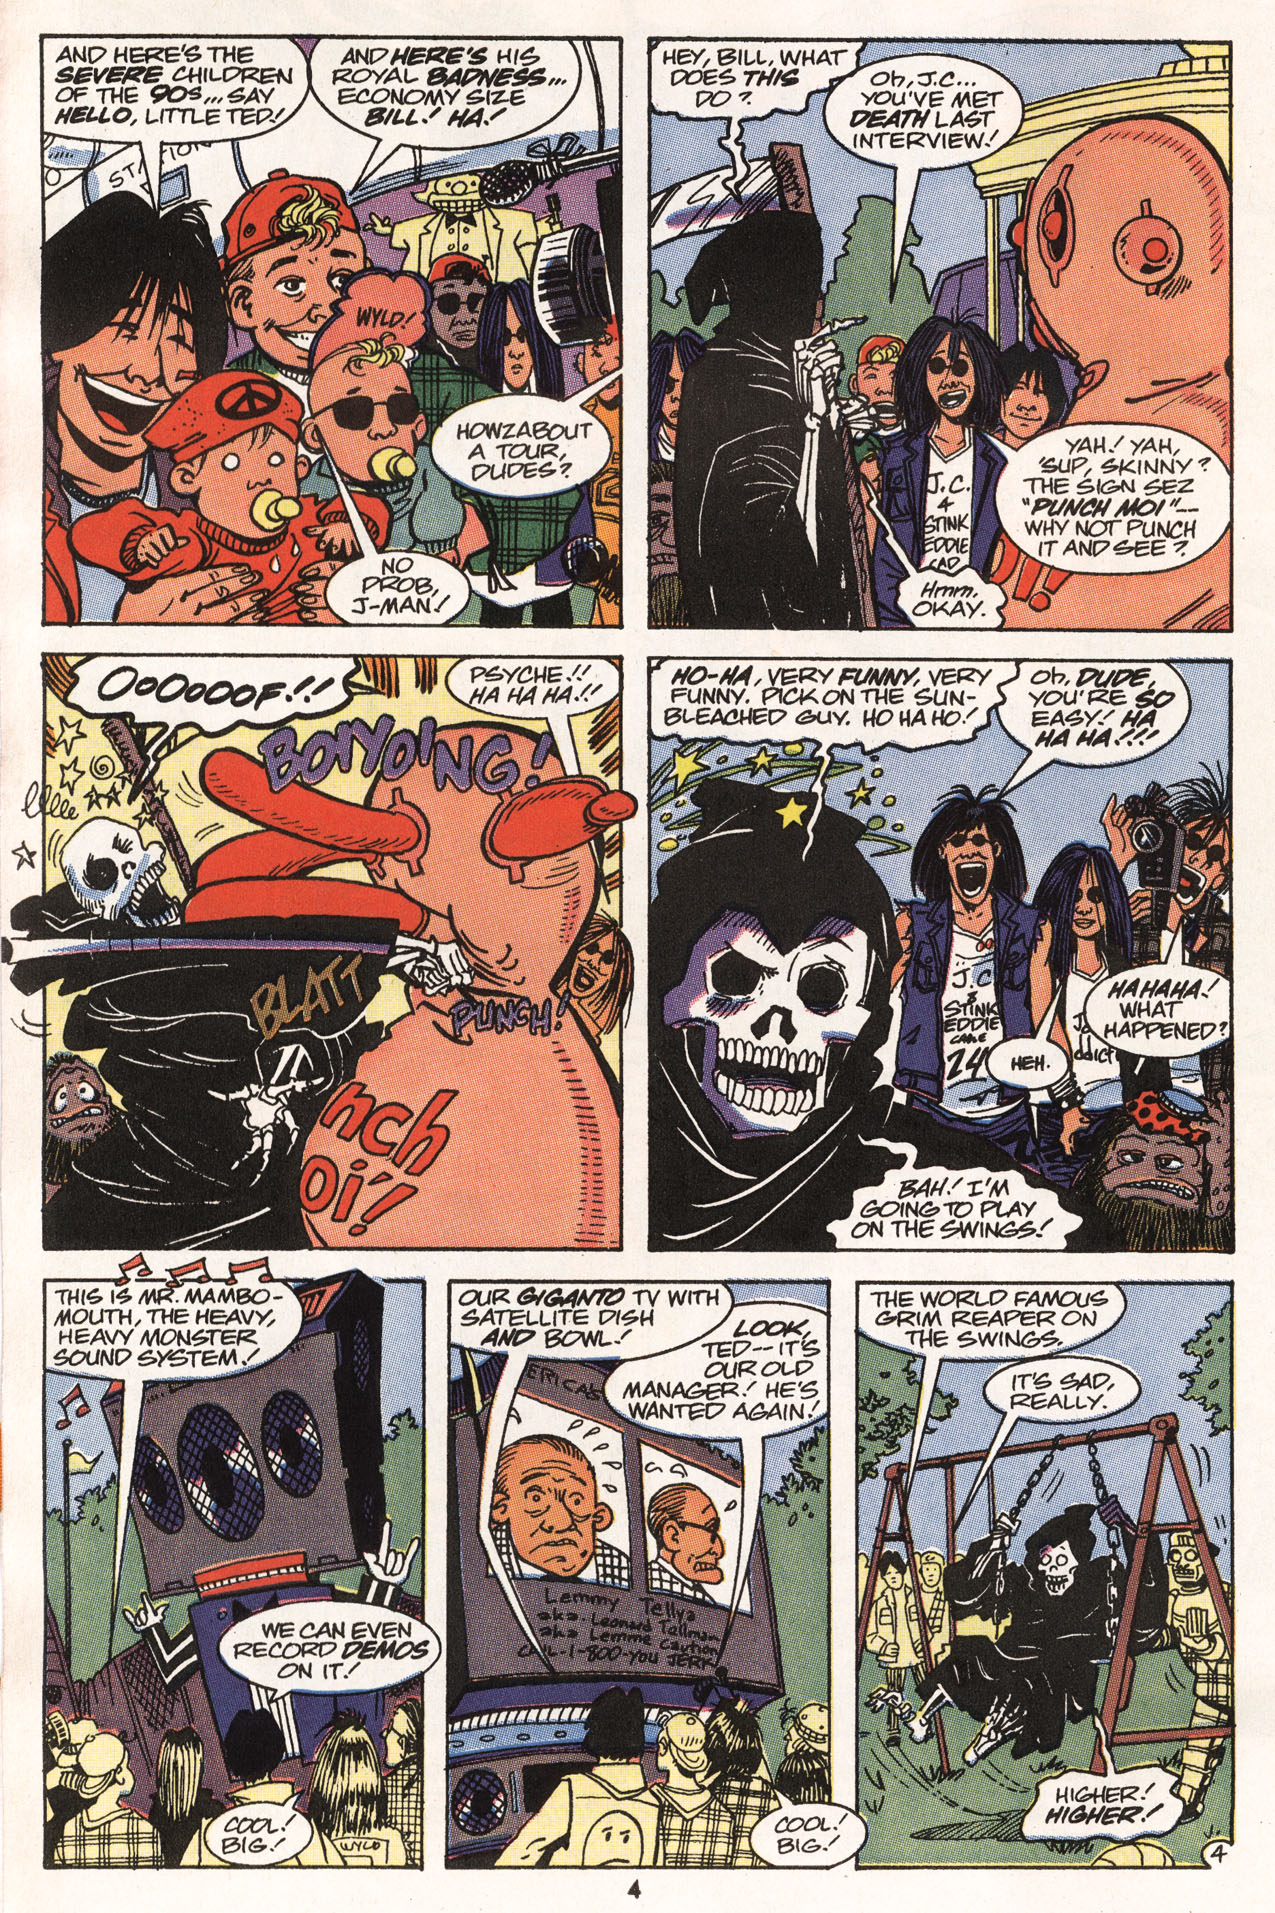 Read online Bill & Ted's Excellent Comic Book comic -  Issue #4 - 5